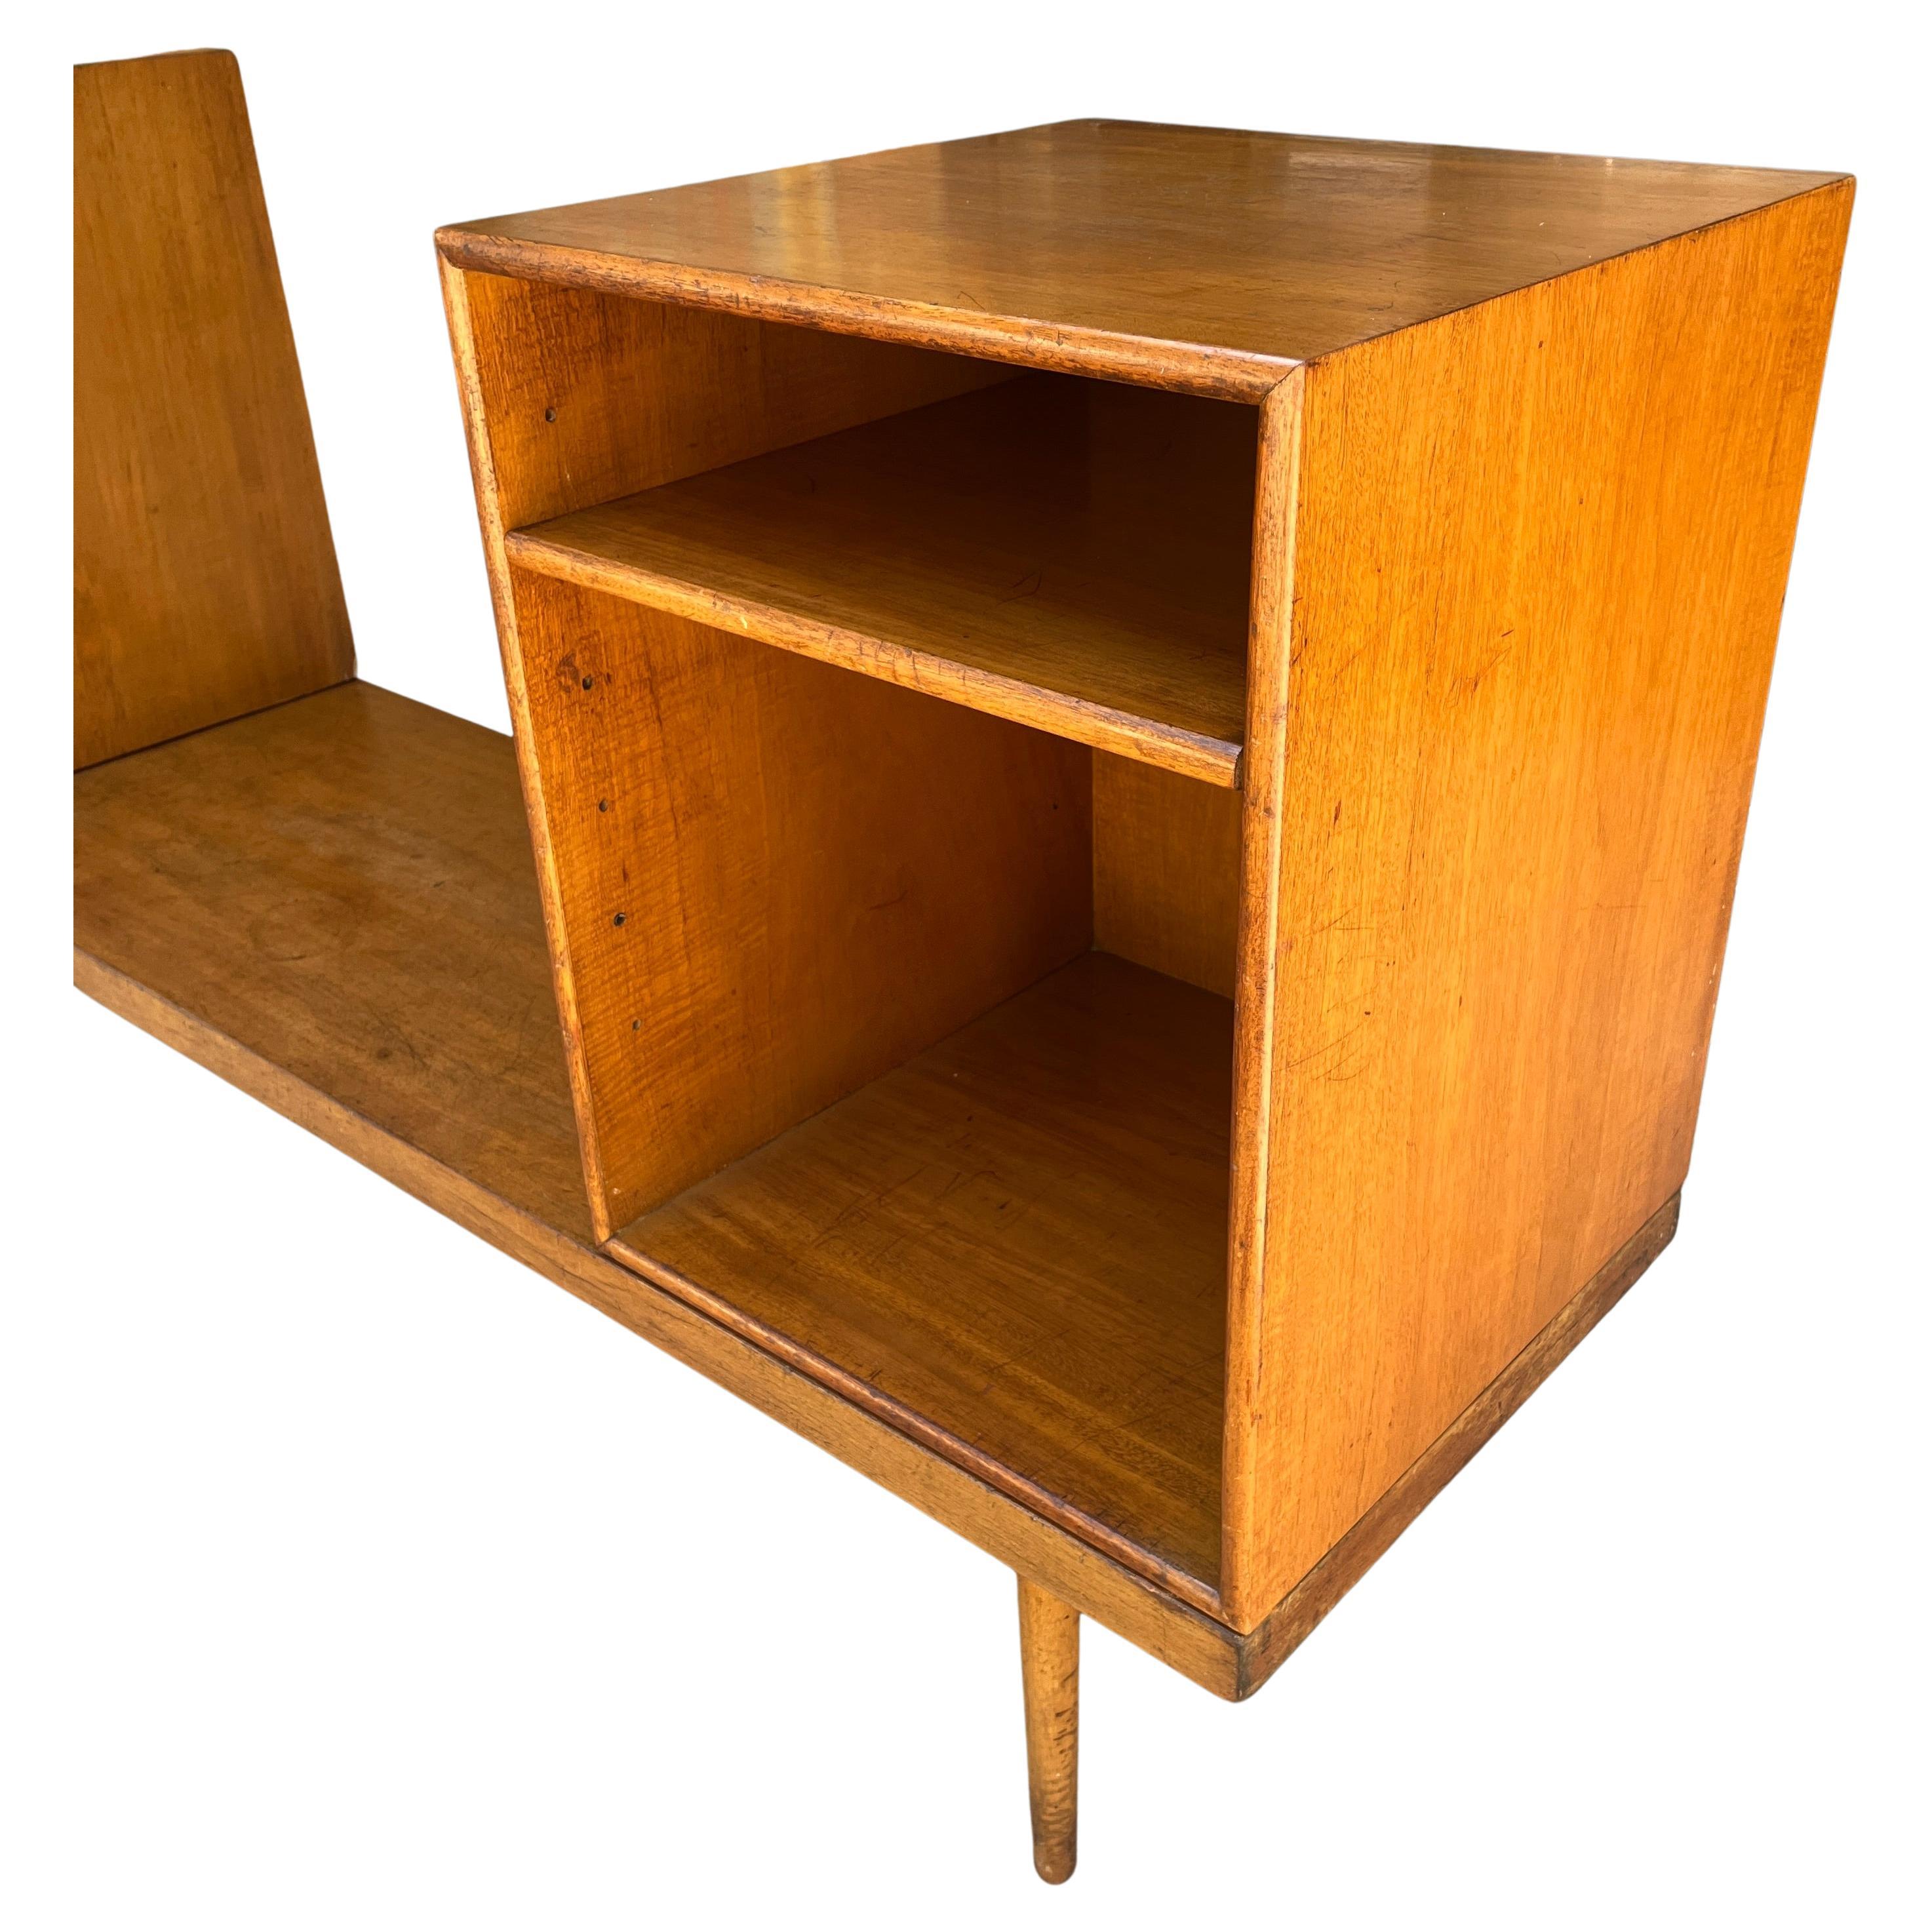 20th Century Rare and Important Midcentury Bench/Cabinets- Eames and Saarinen -Organic Design For Sale